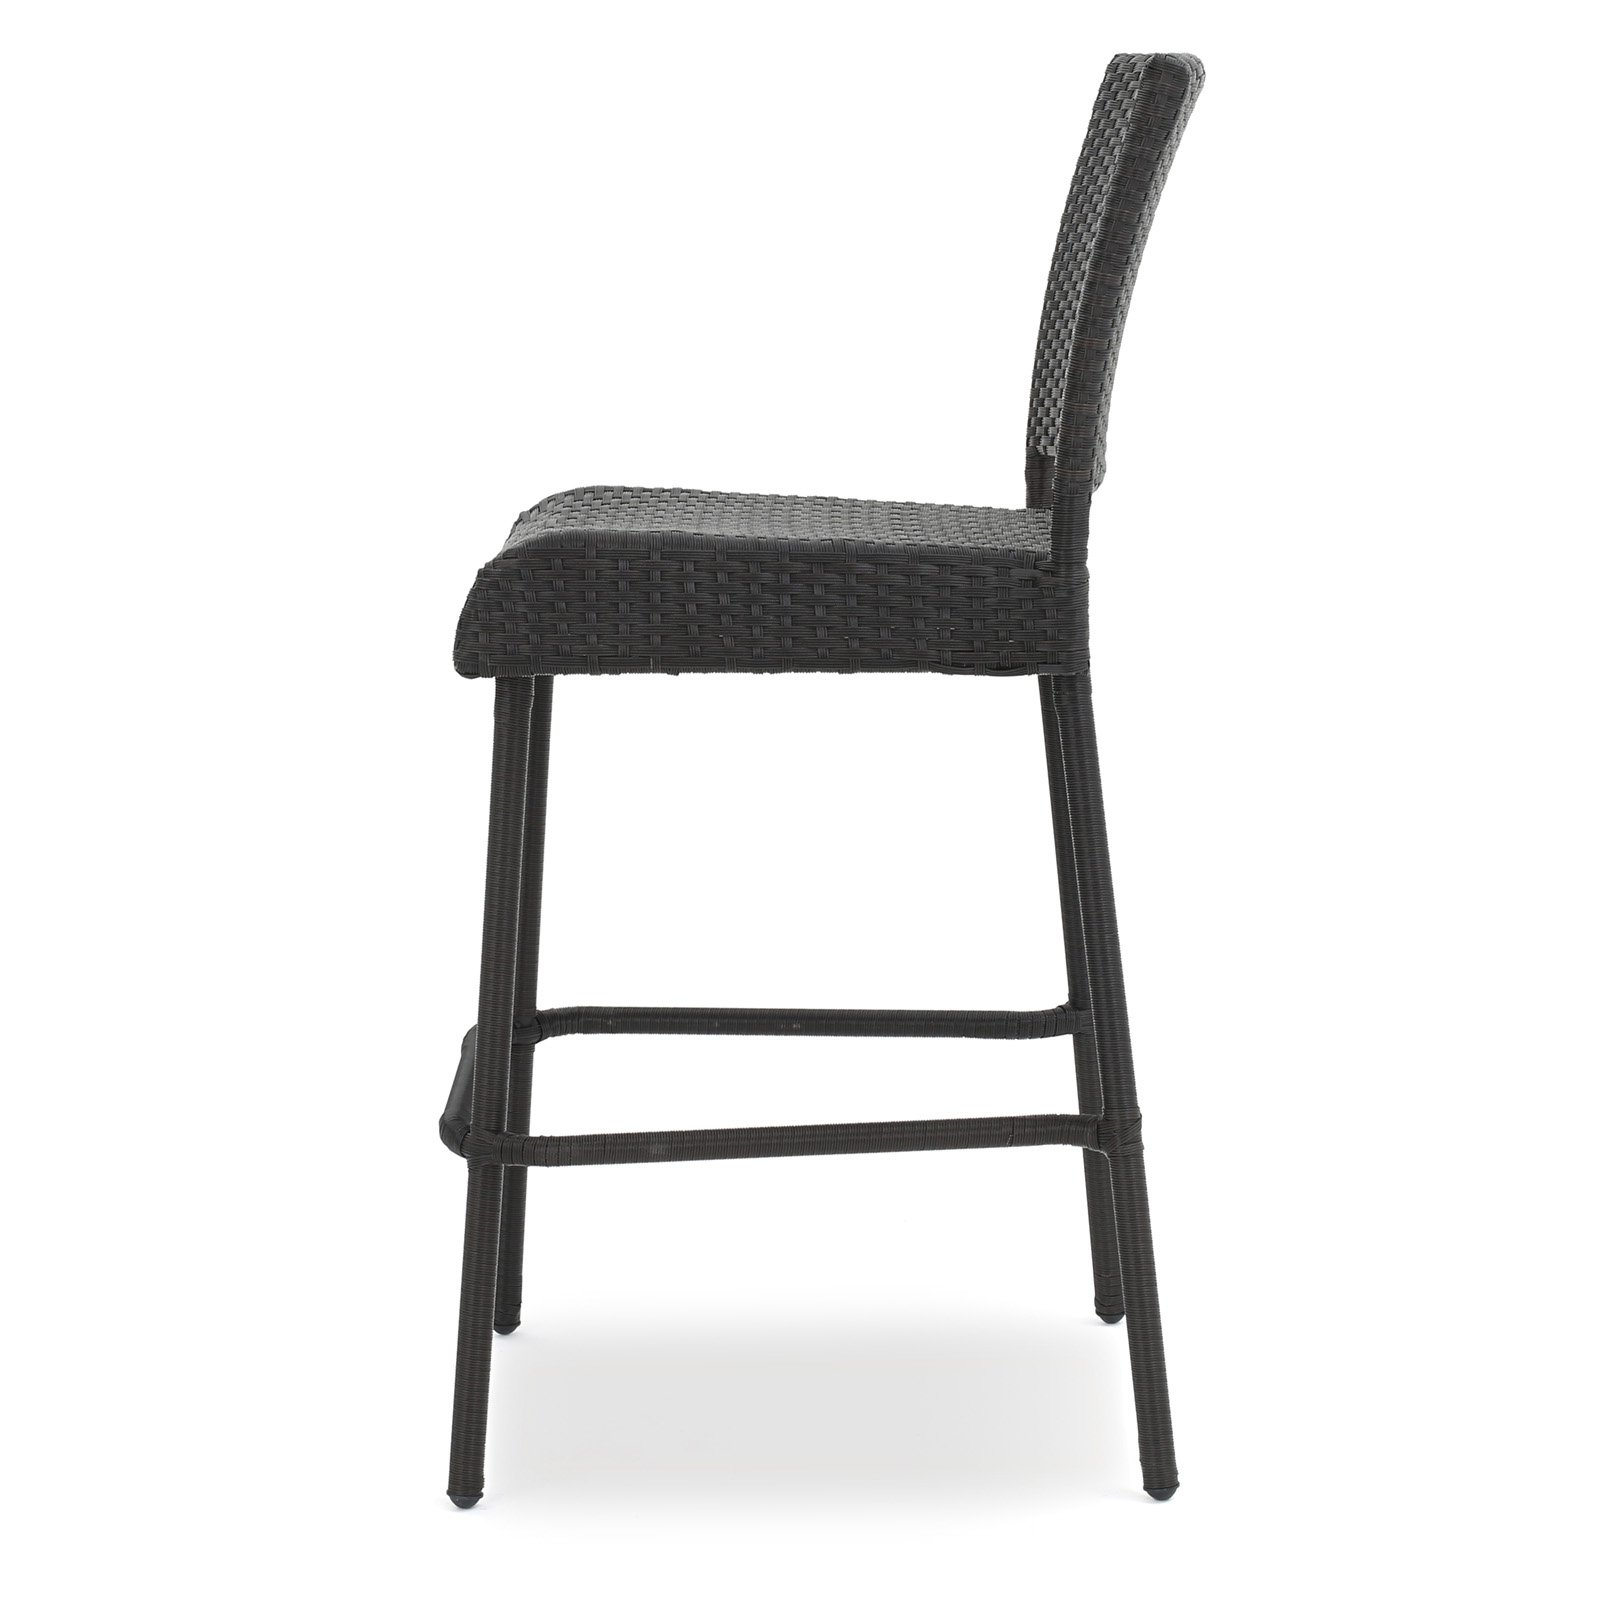 Trestle 29-Inch Outdoors Dark Brown Wicker Barstools (Set of 2) - image 4 of 11